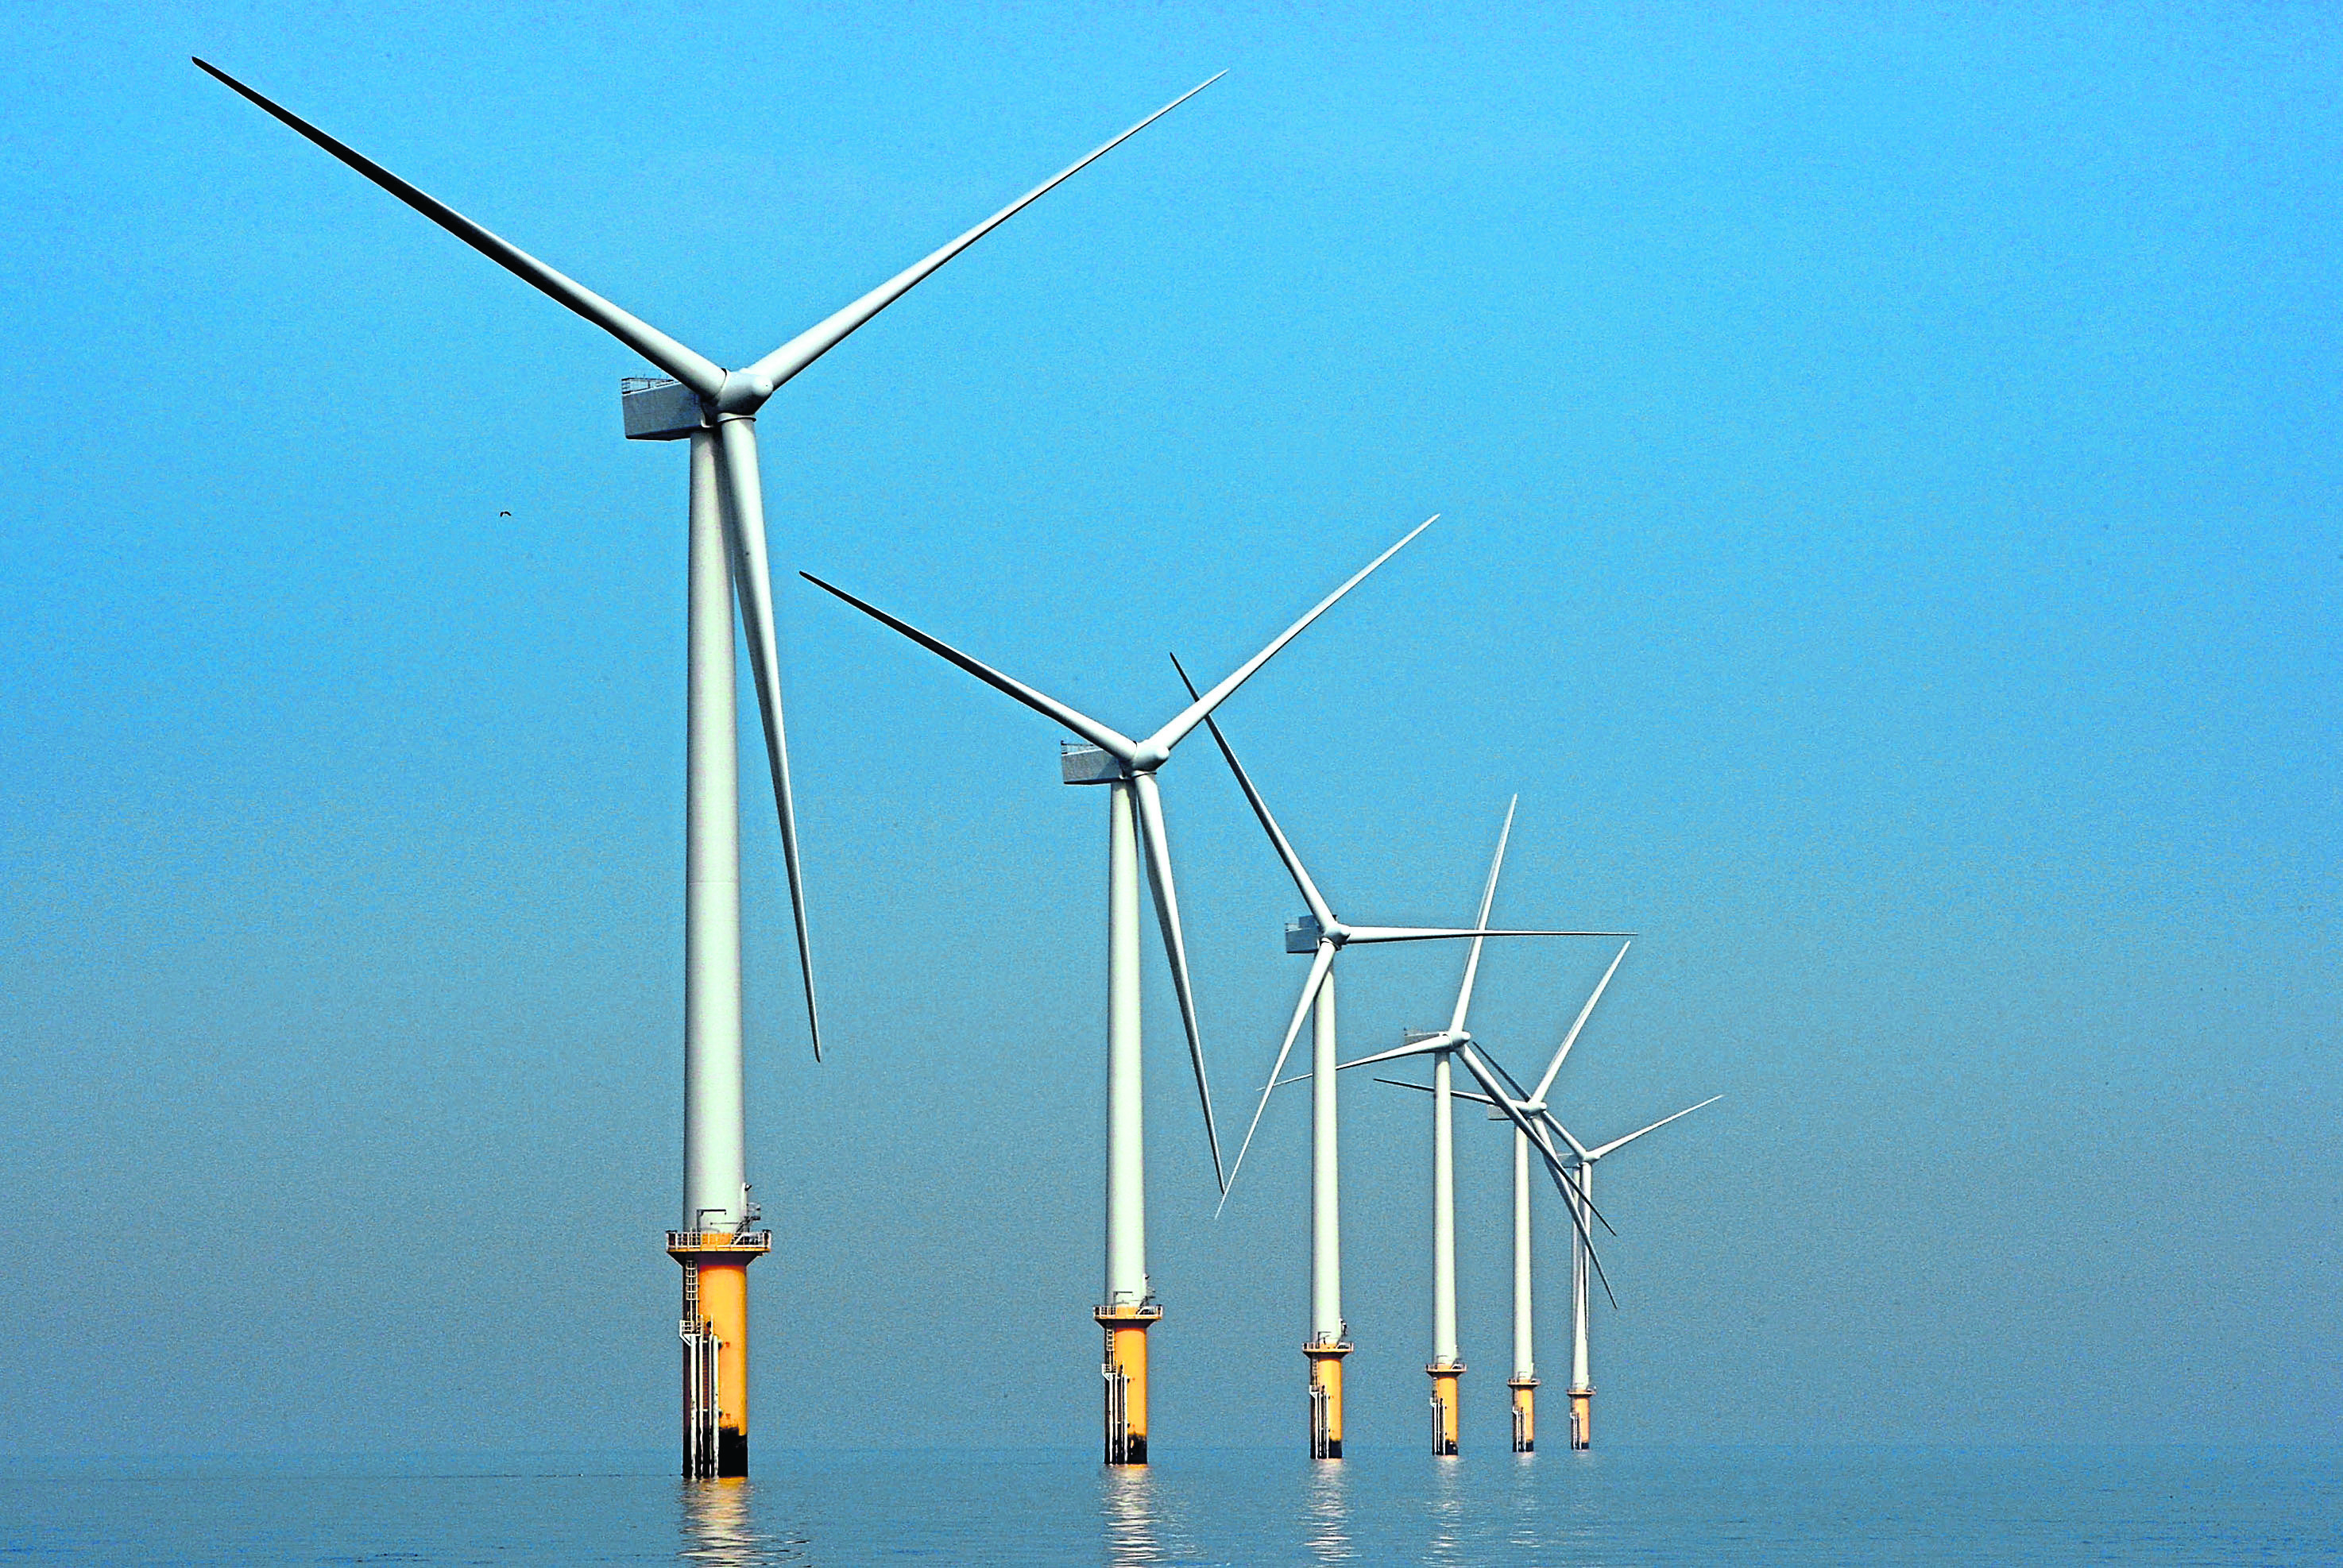 The offshore projects will be named Seagreen Alpha Offshore Wind Farm (OWF) and Seagreen Bravo OWF.